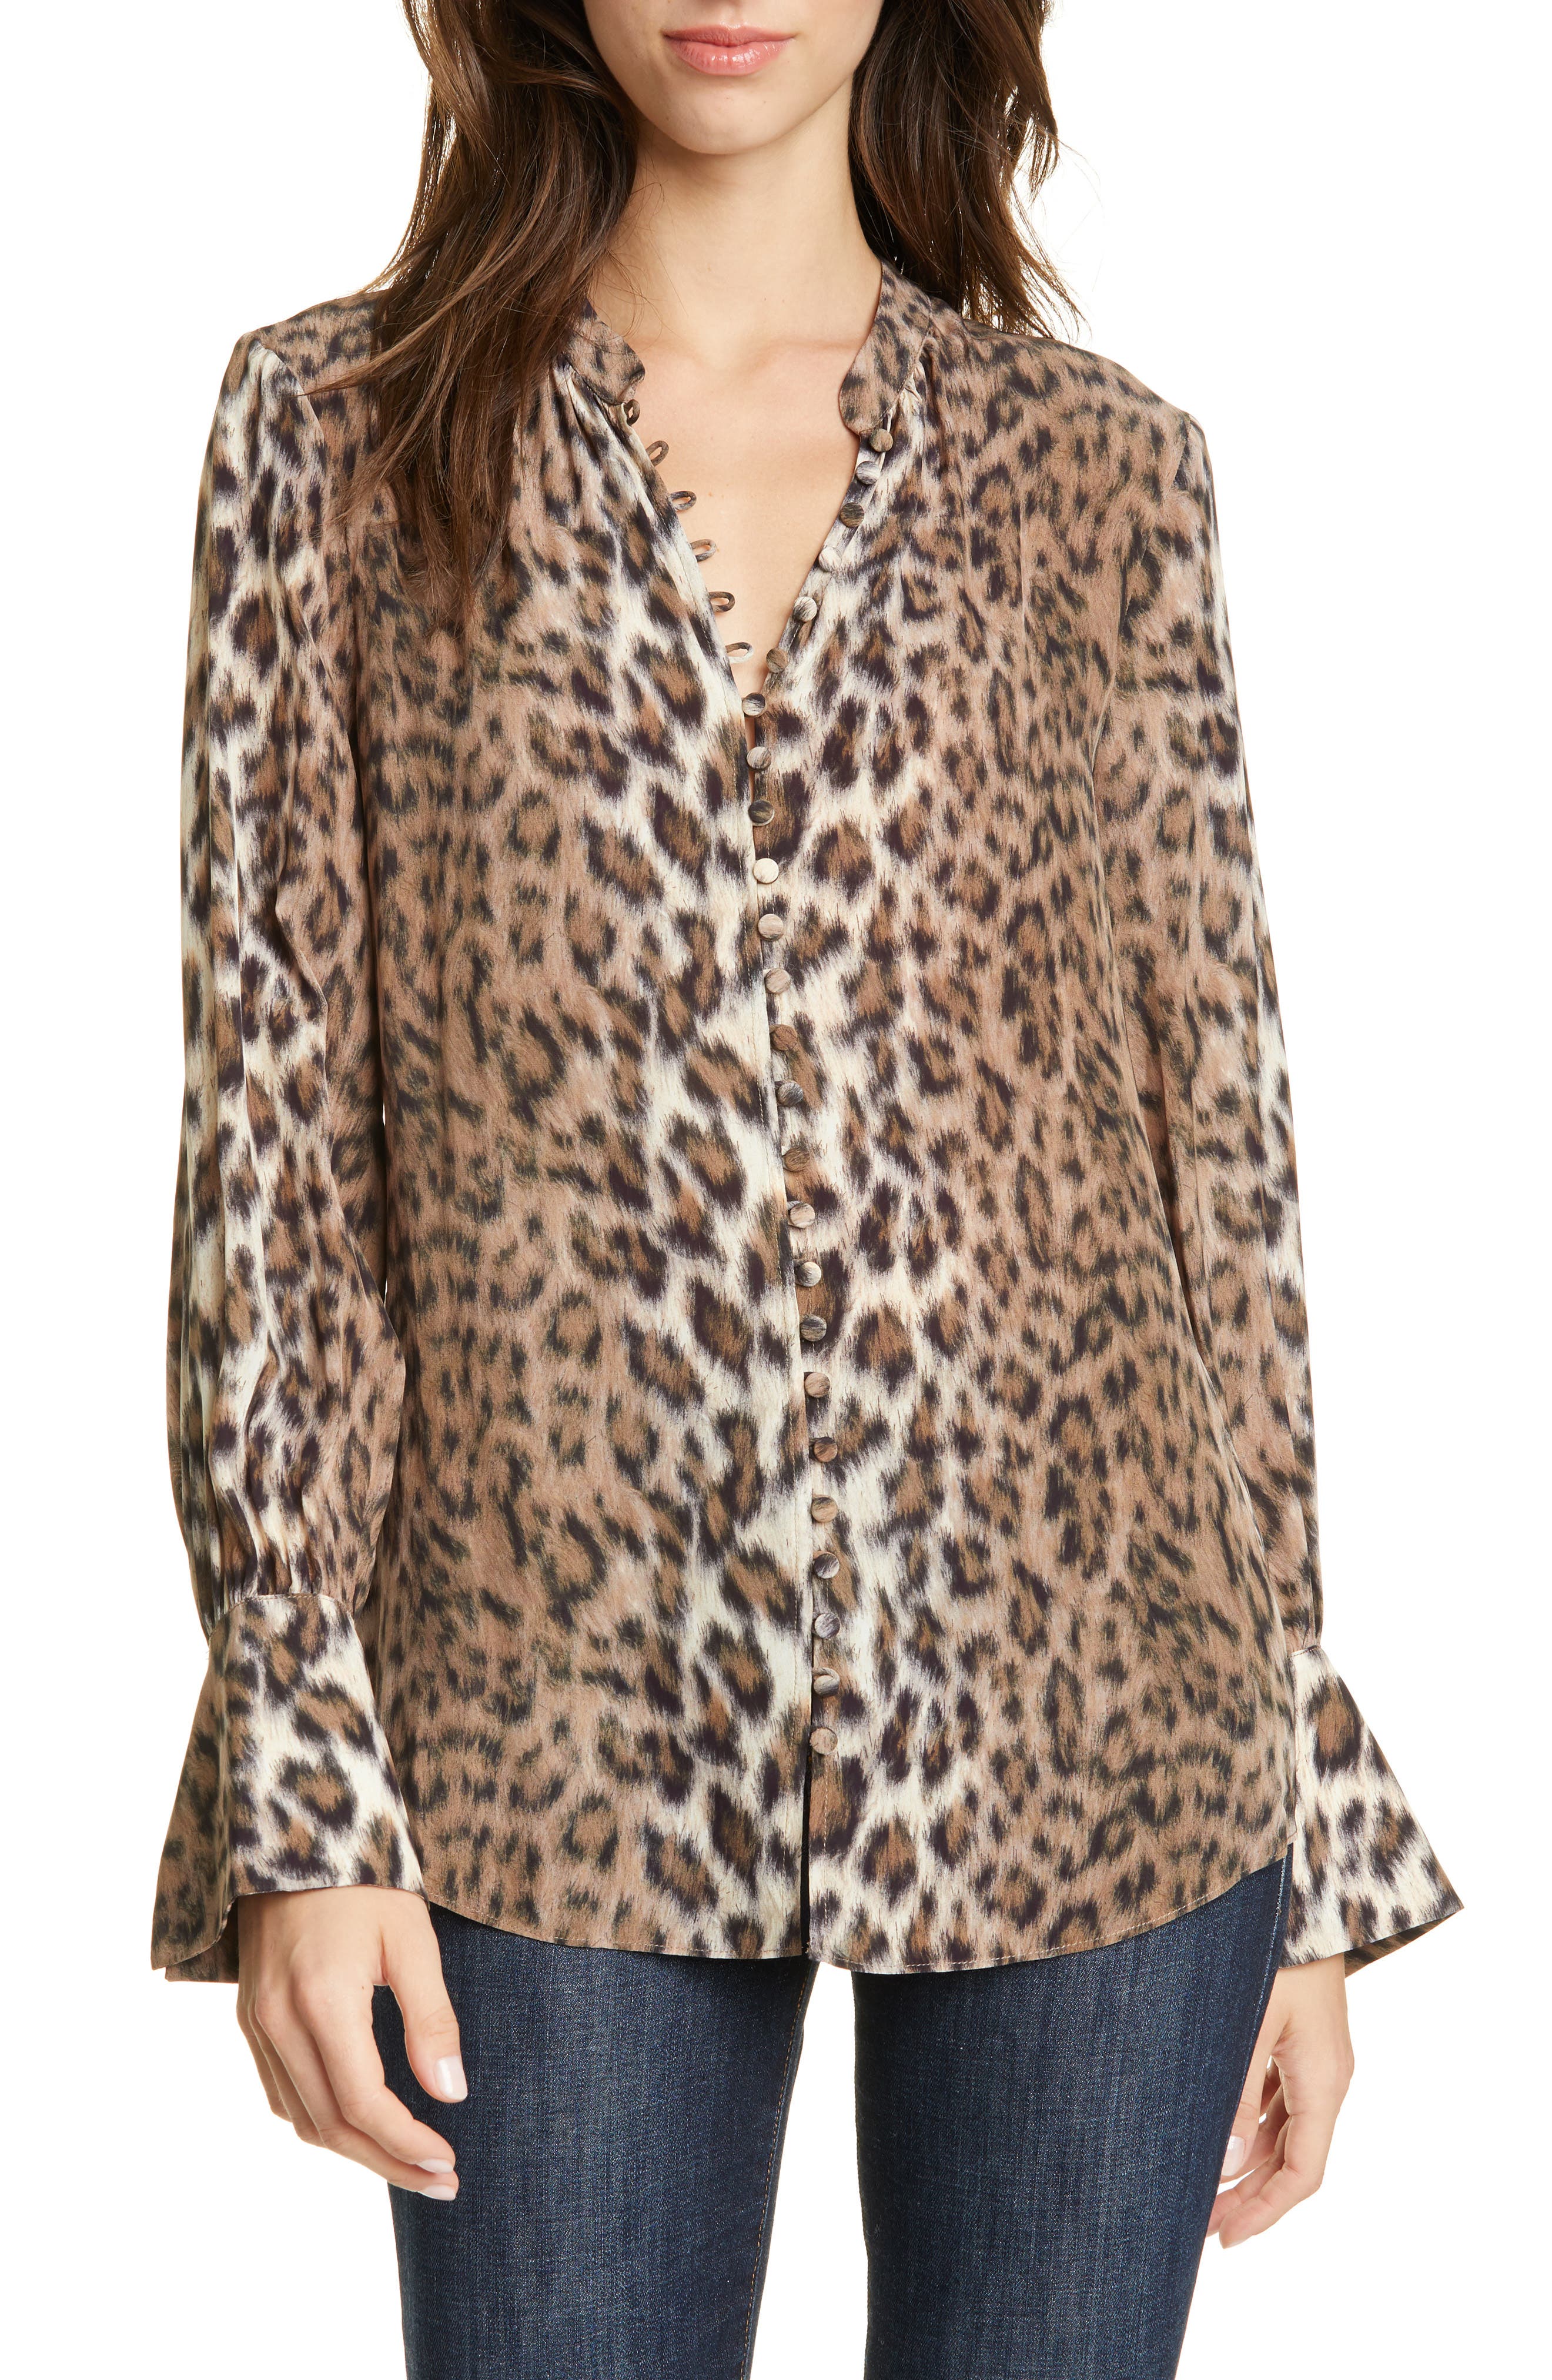 Joie Tariana Leopard Blouse | Nordstrom